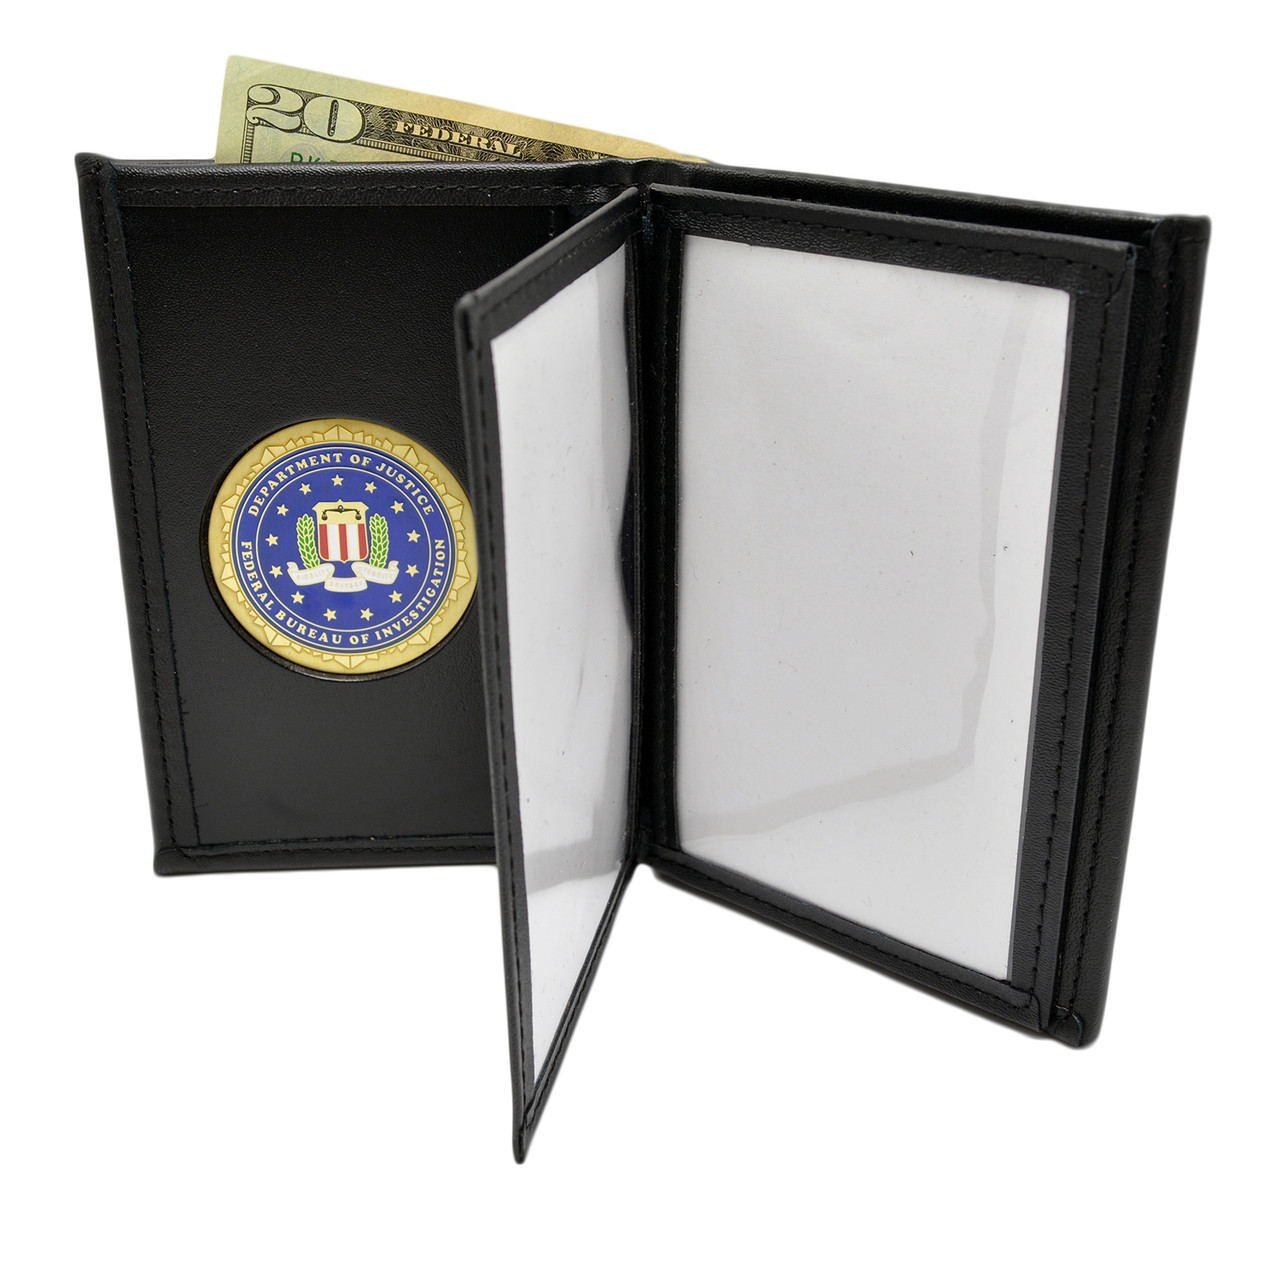 Where to get FBI / Security style ID Wallets, Page 2